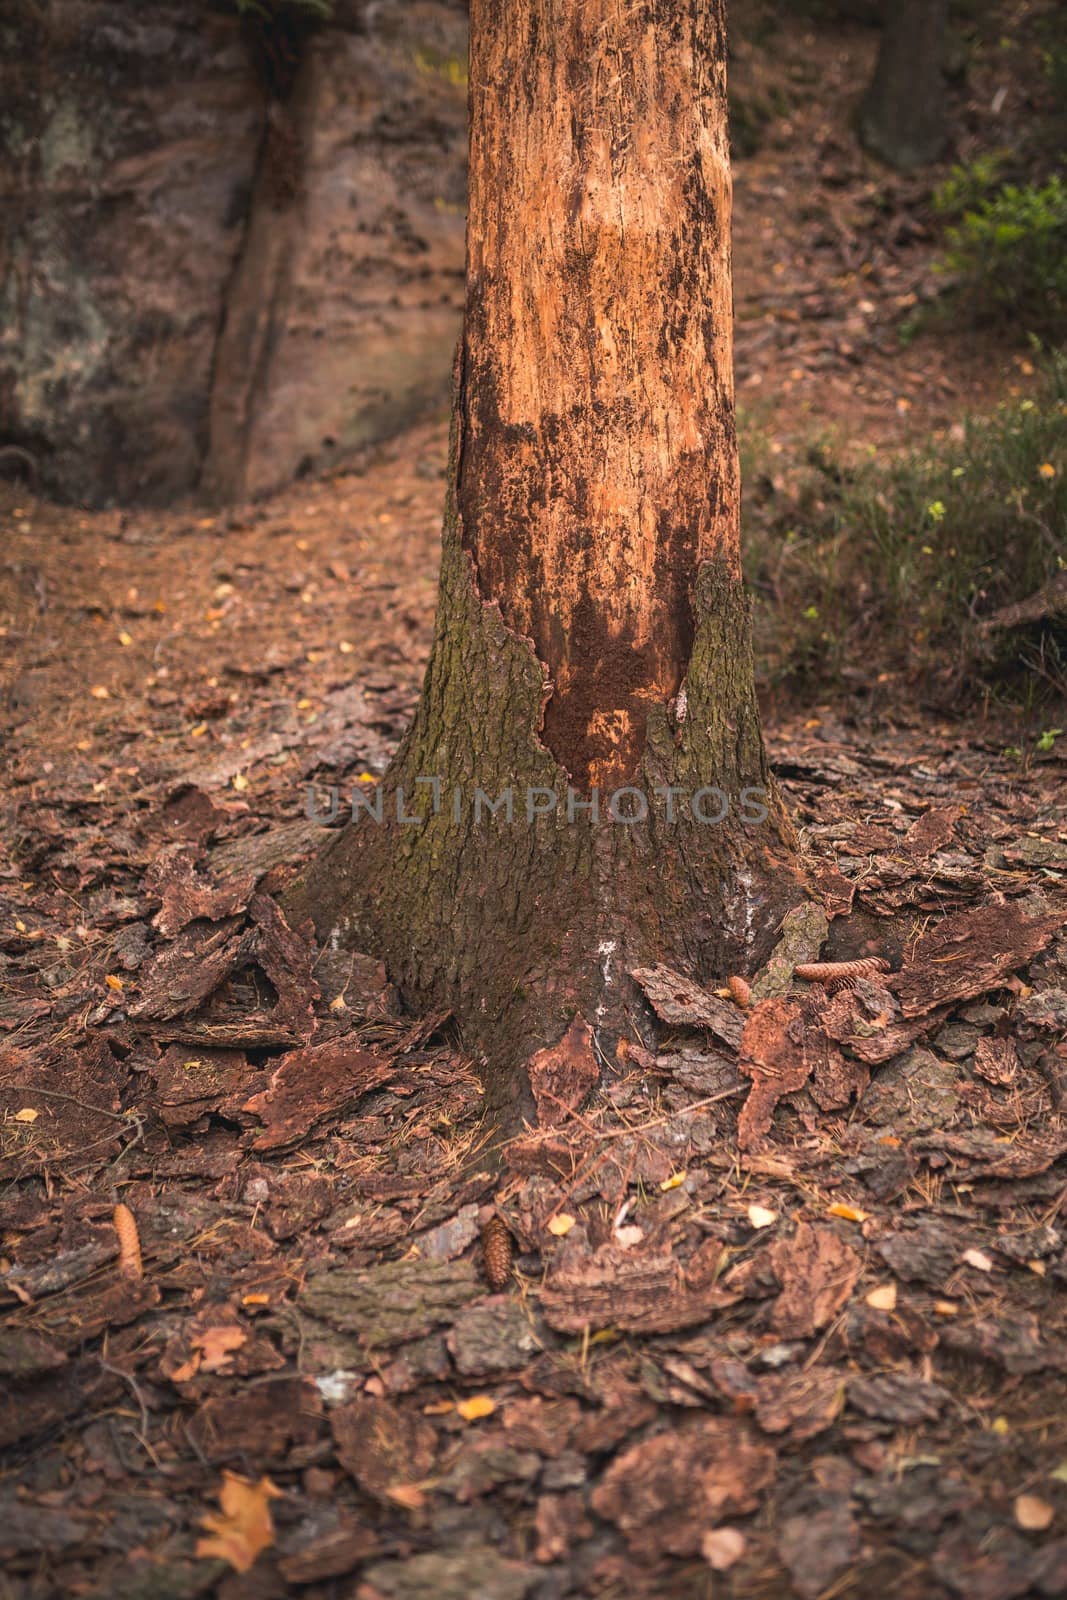 A tree infected with a bark beetle.